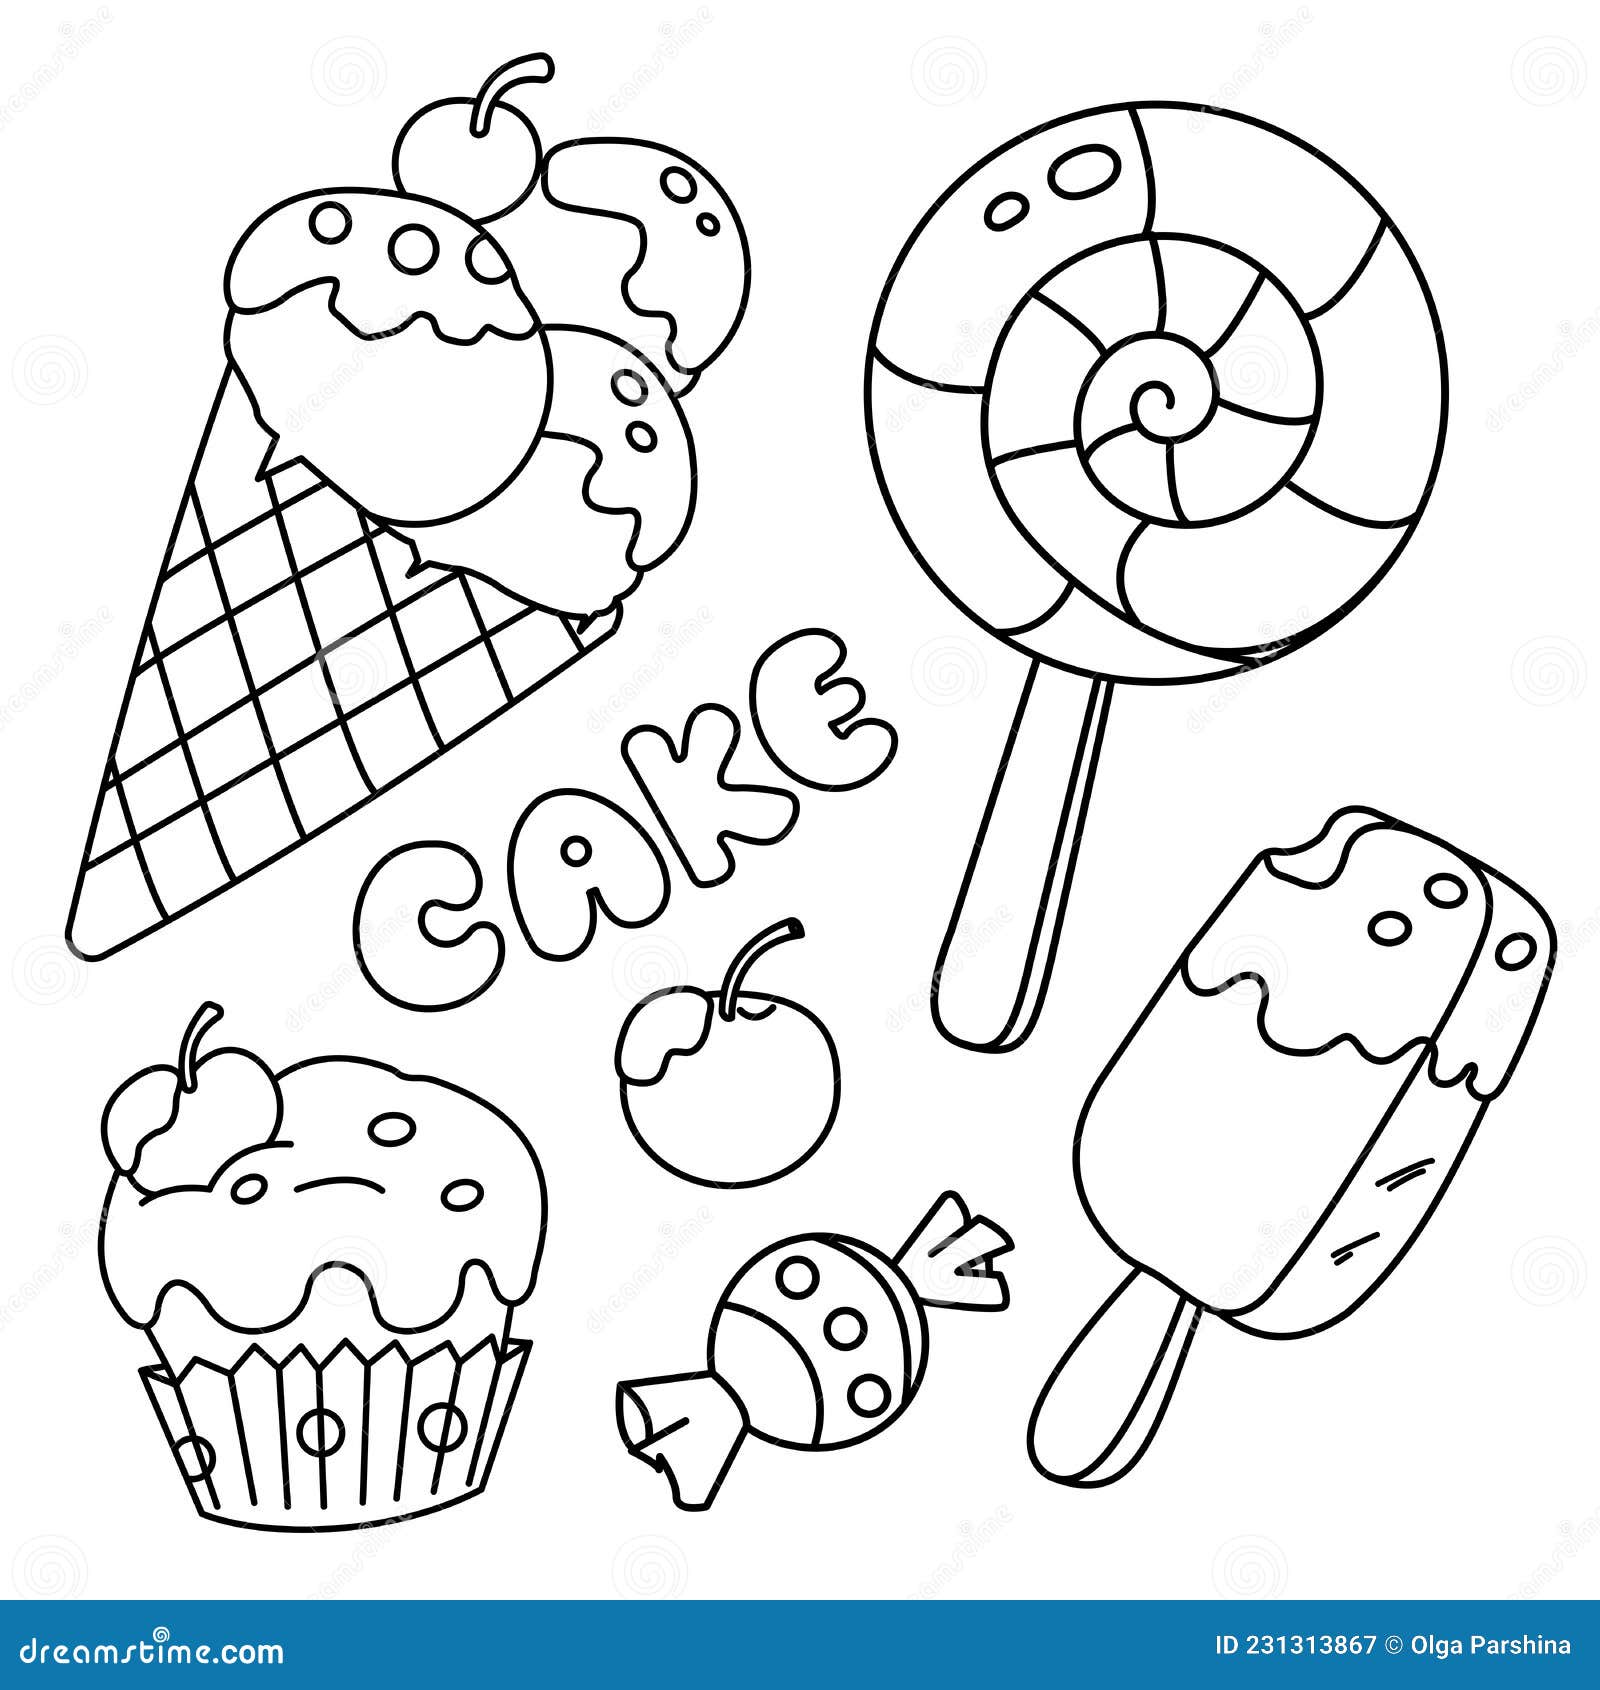 coloring page outline of candy, ice cream and cupcake. food and sweetness. coloring book for kids